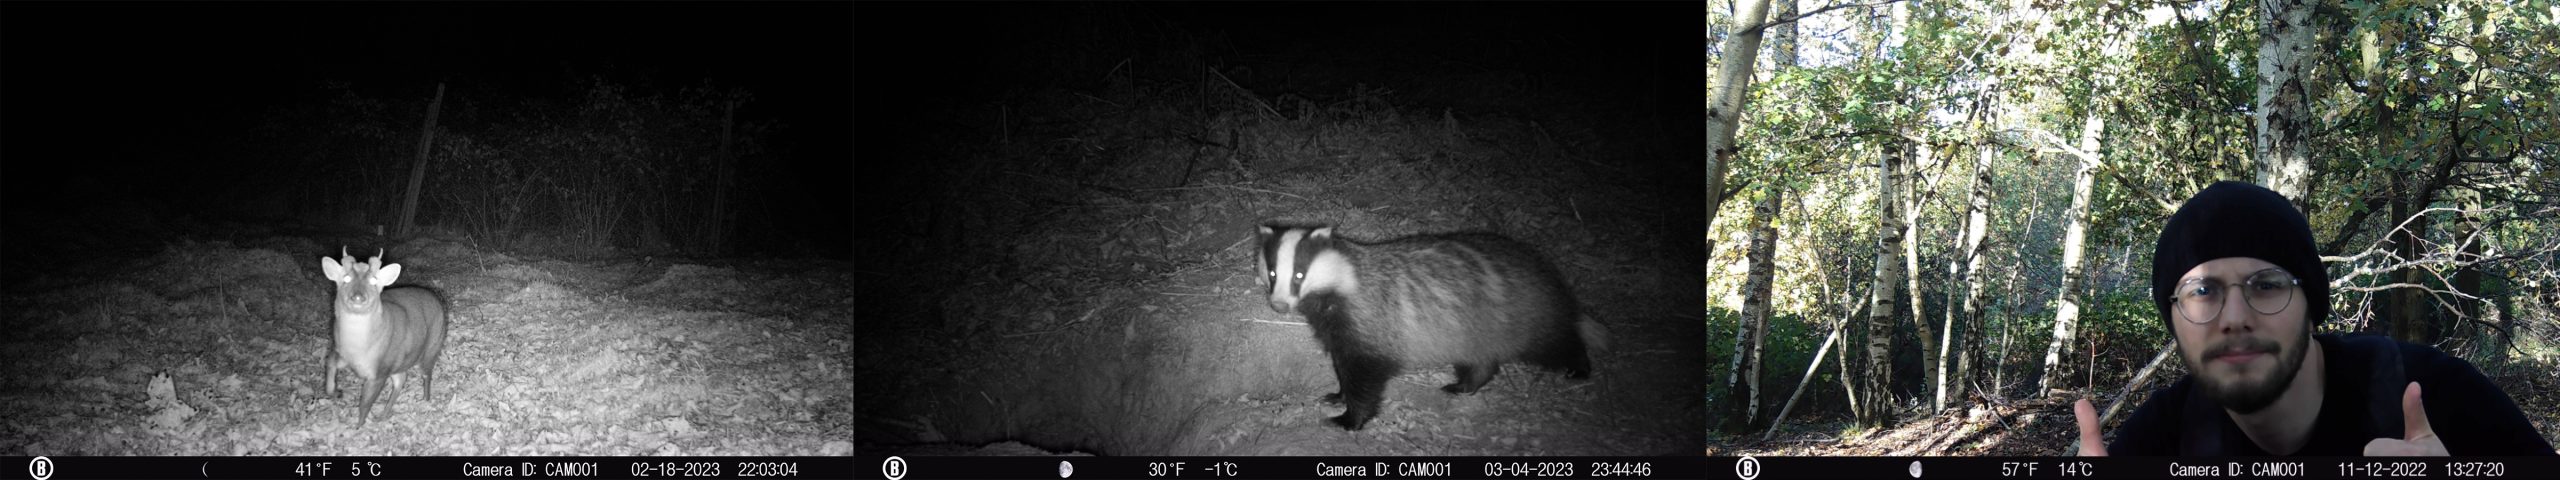 Camera trap images of a Reeve's muntjac, European badger, and one of the team members.